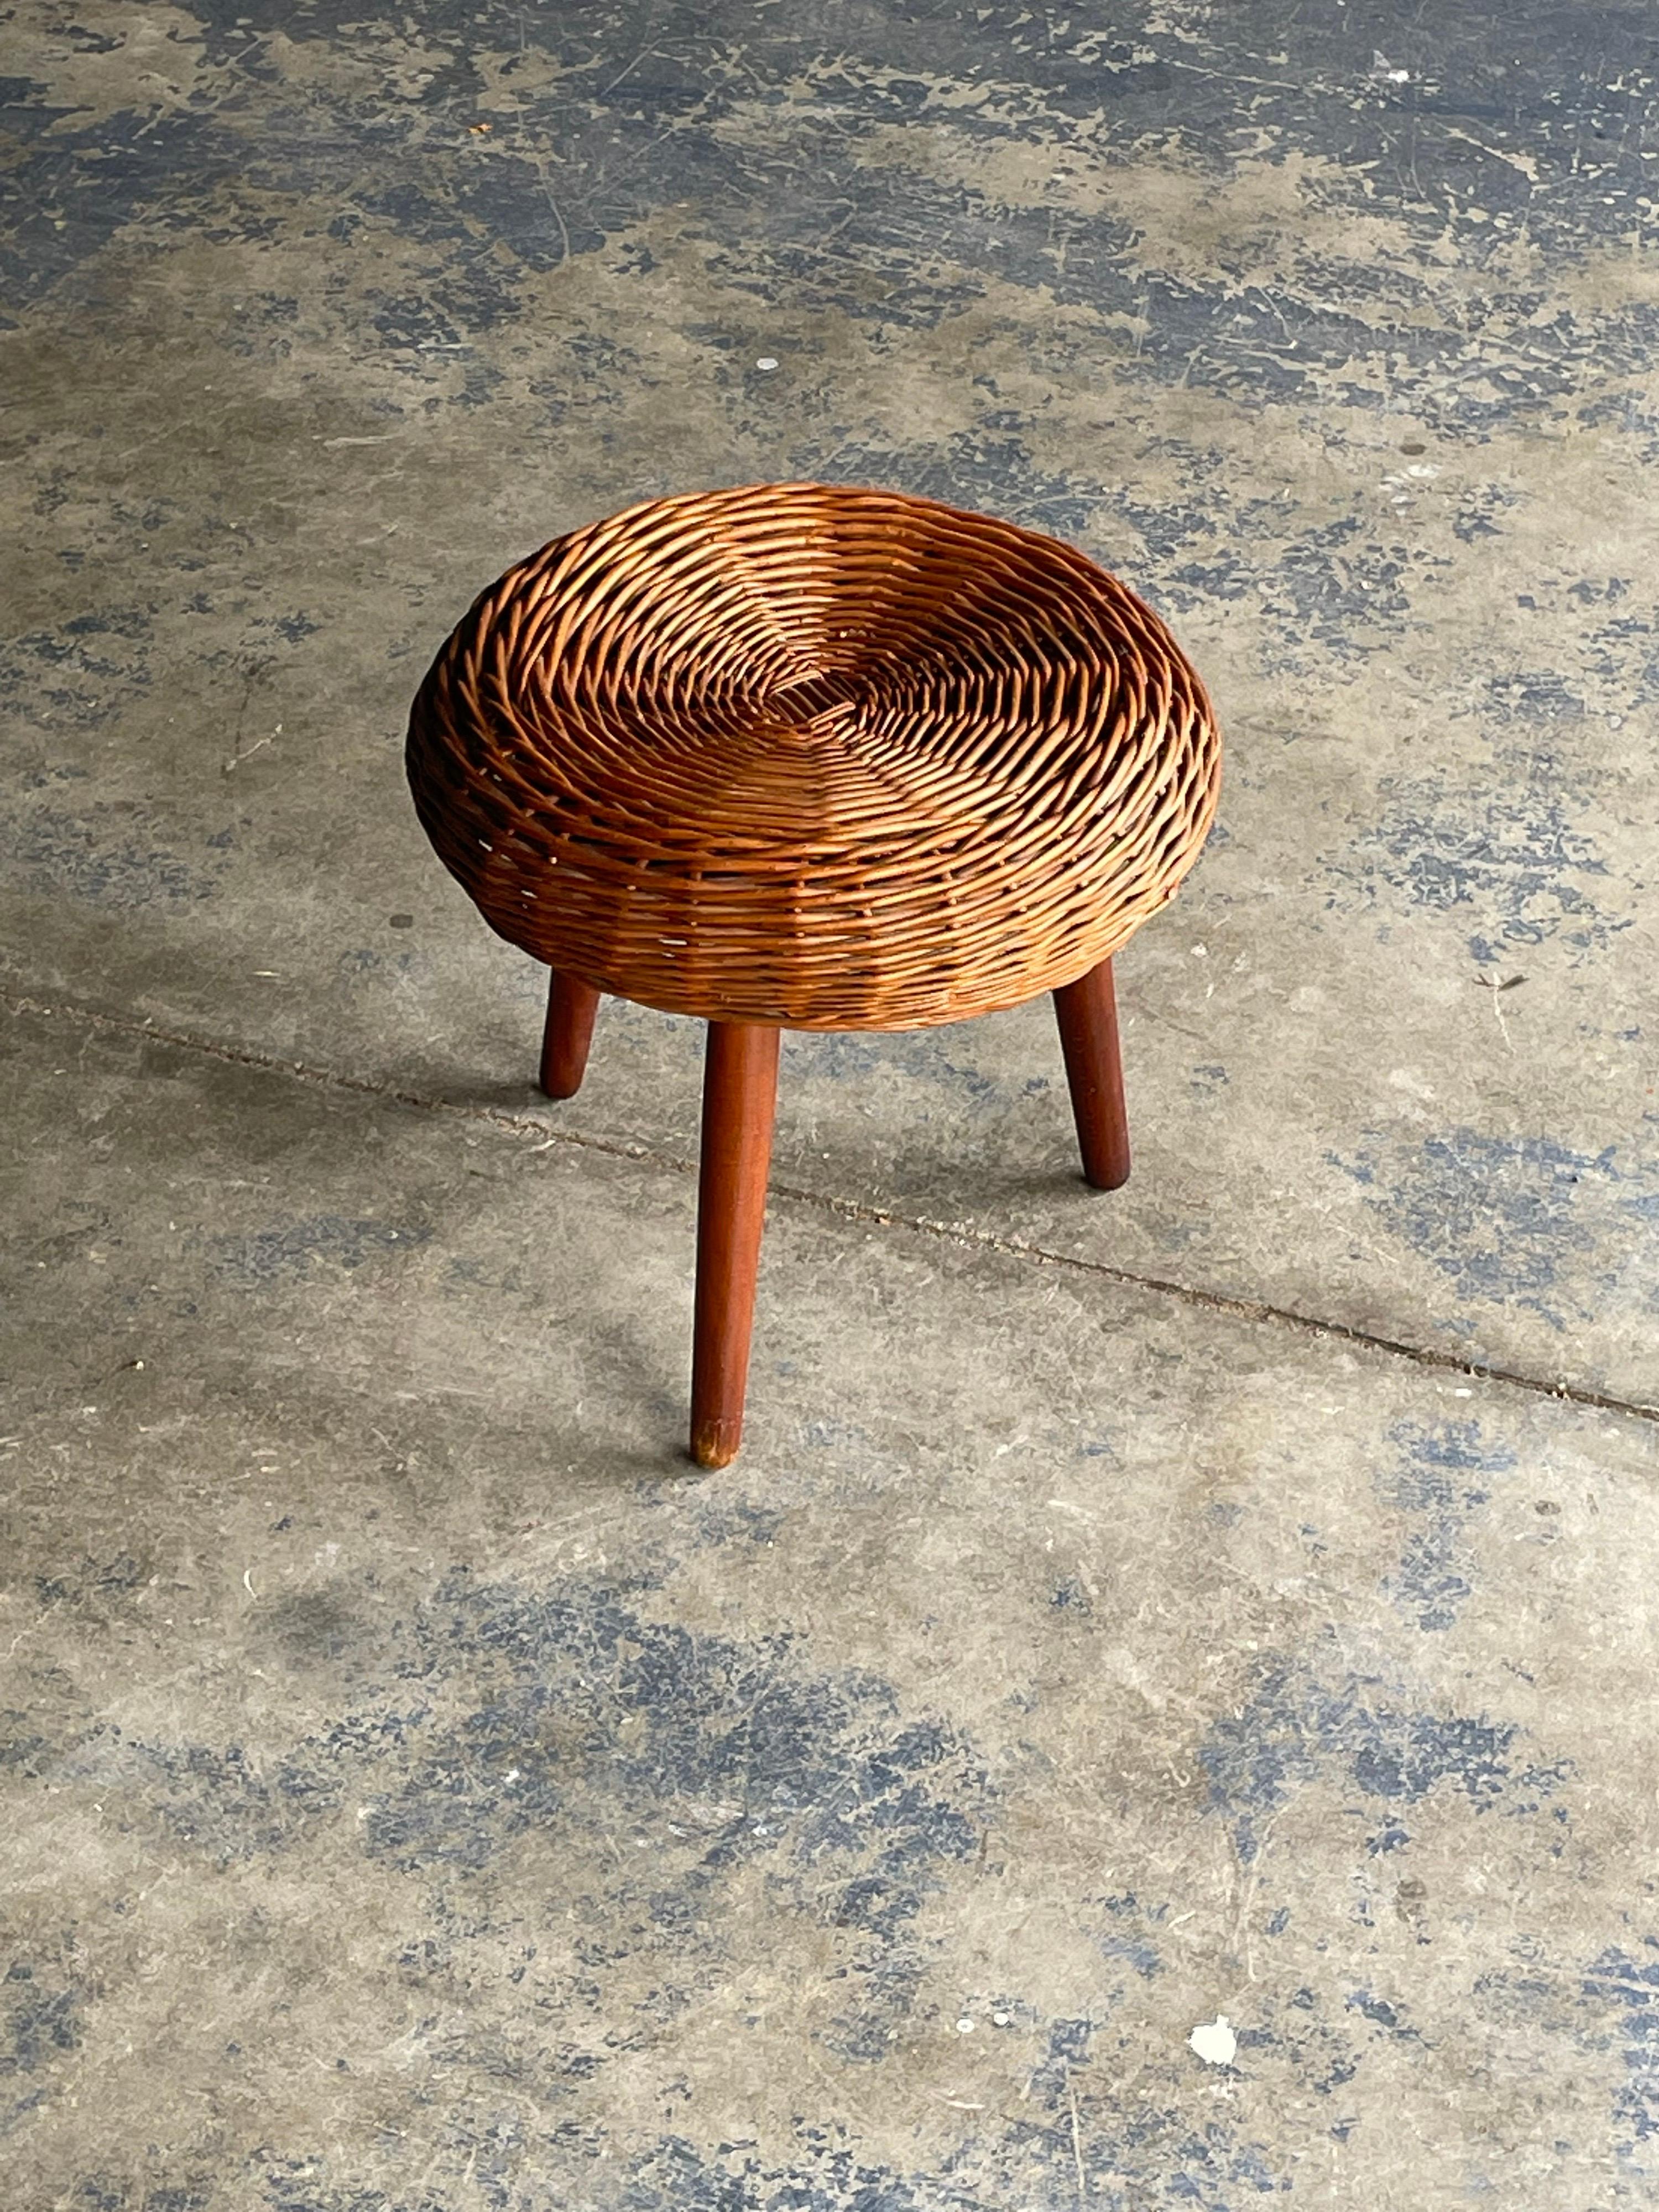 A rattan/ wicker topped stool with solid wood legs attributed to Tony Paul. Blends well with organic and minimalist design.

Please note that while these are commonly regarded as stools I would advise against putting full body weight on it. I